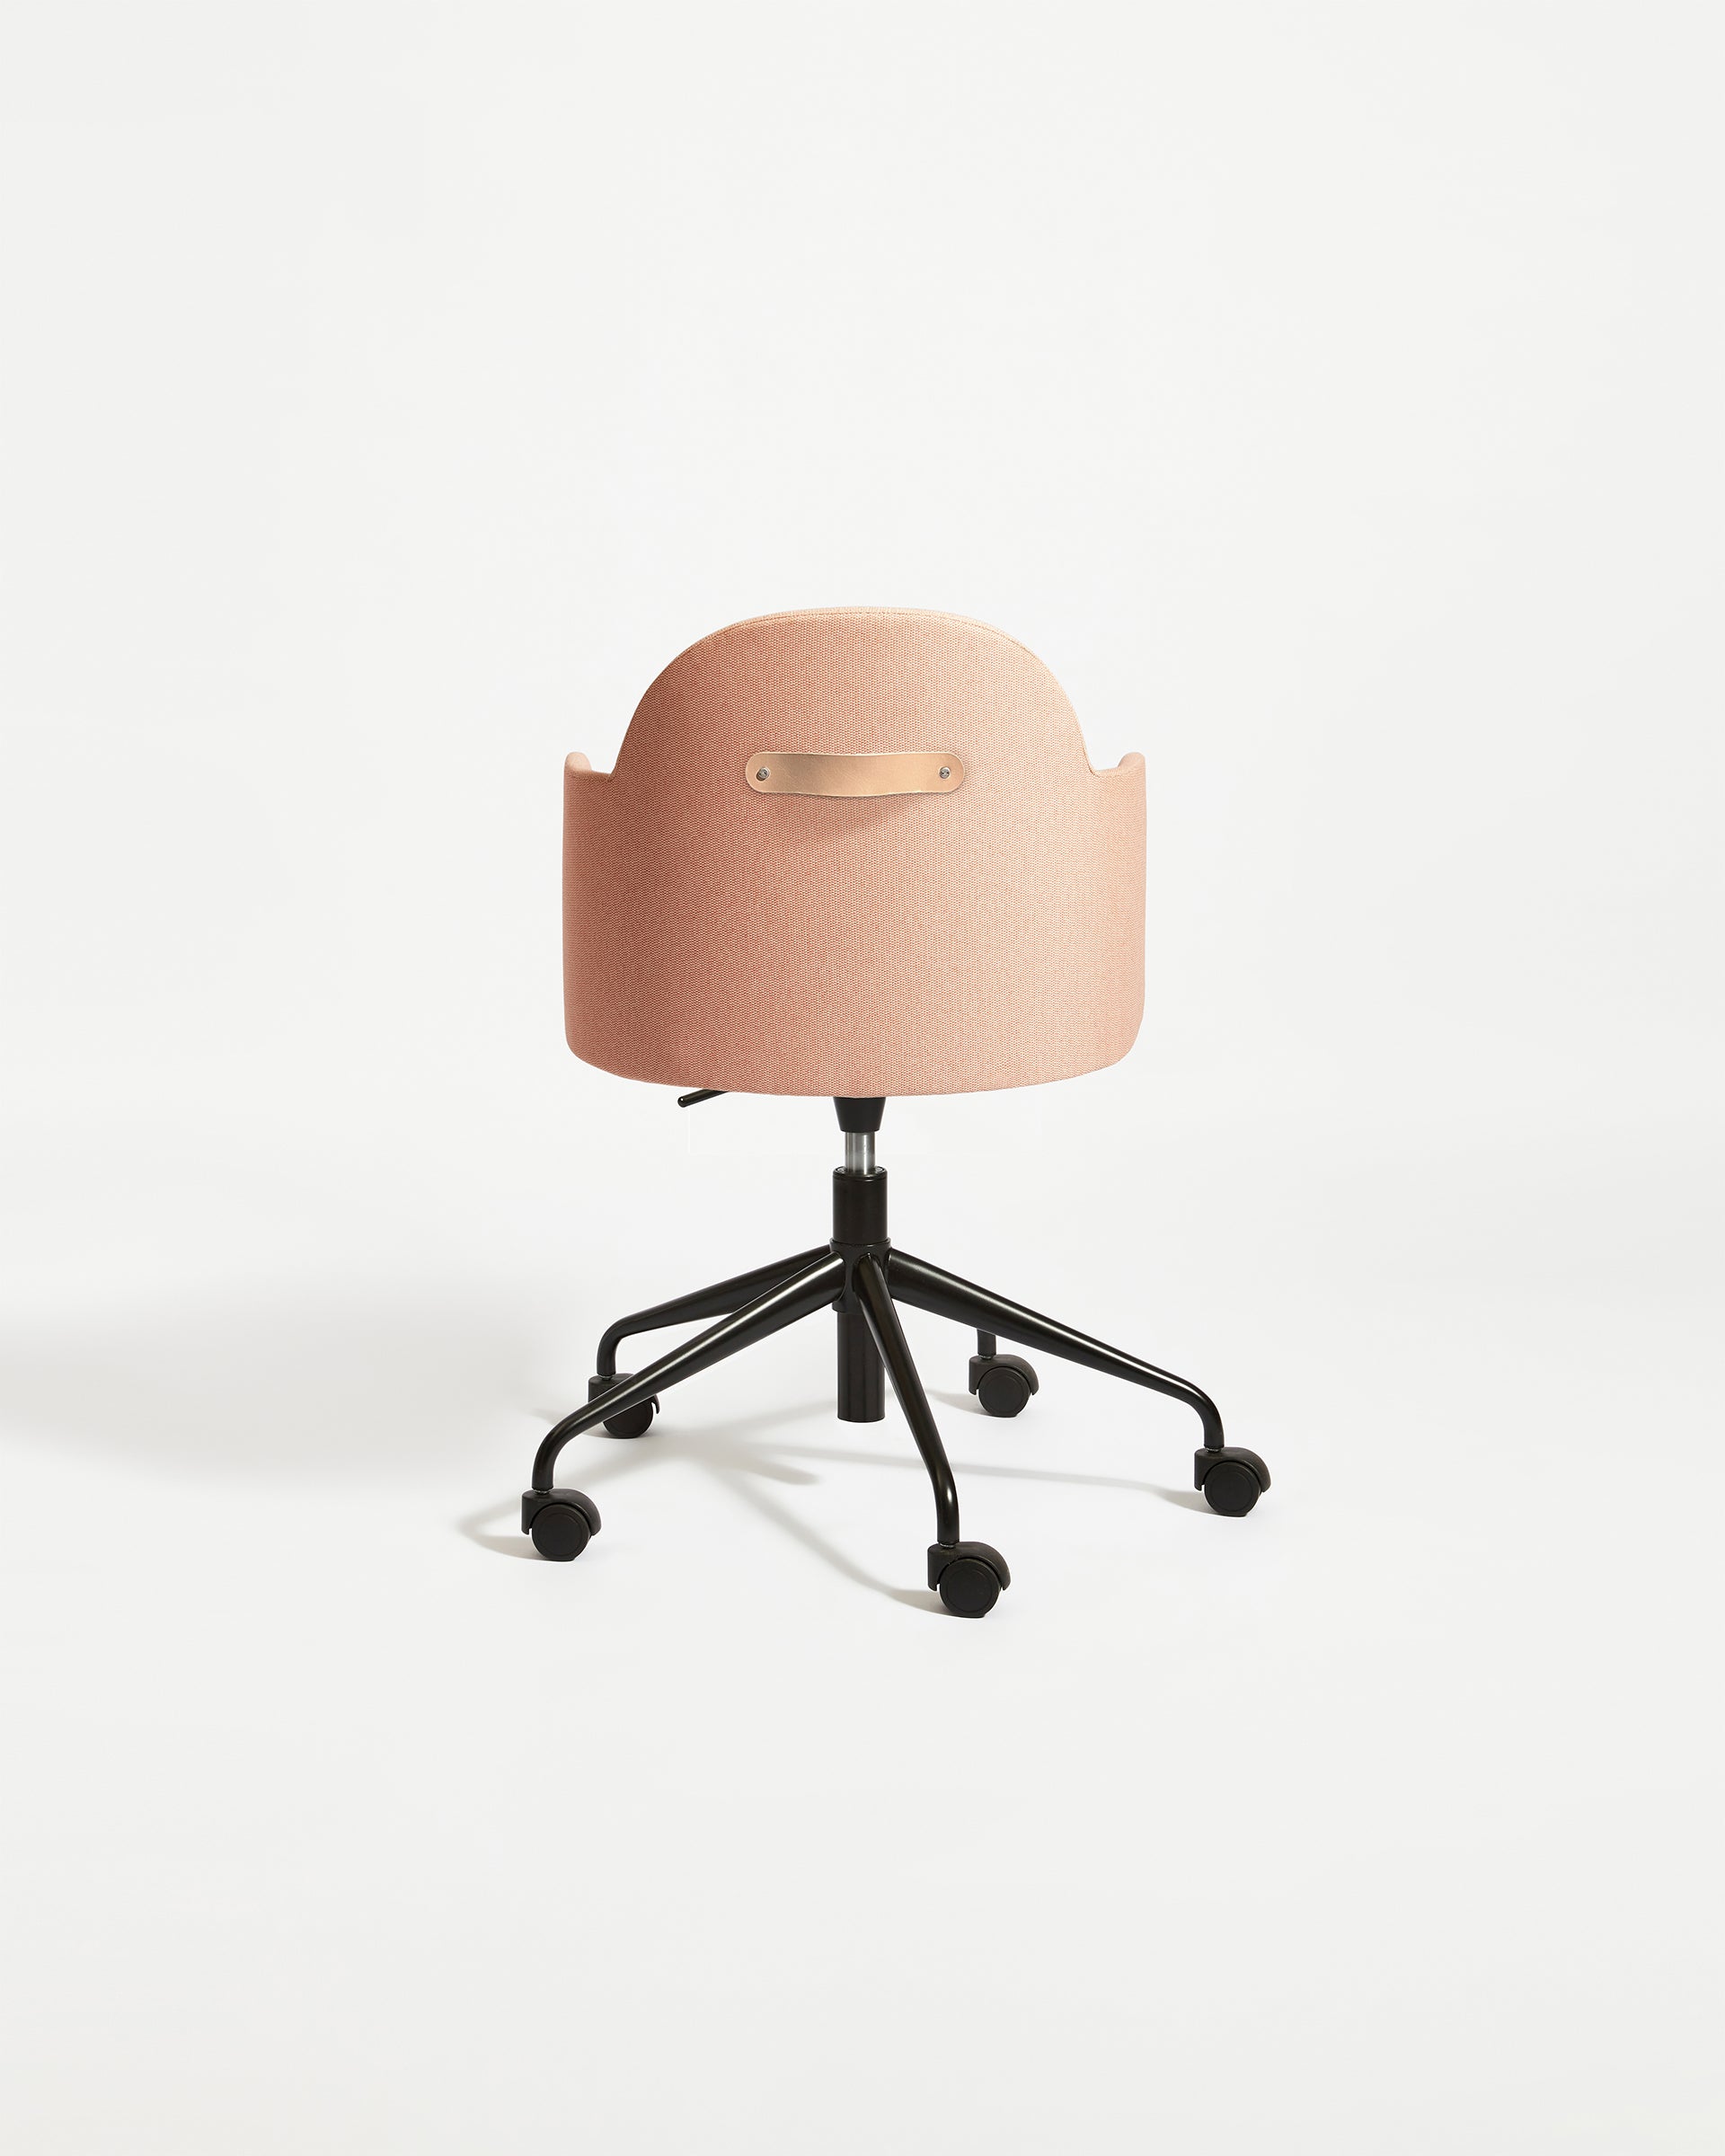 Potato Armchair Swivel Gaslift with Castors Black Base | Office or Dining Tub Chair with Handle | Gibson Karlo | DesignByThem ** HF2 Messenger - 097 Krill